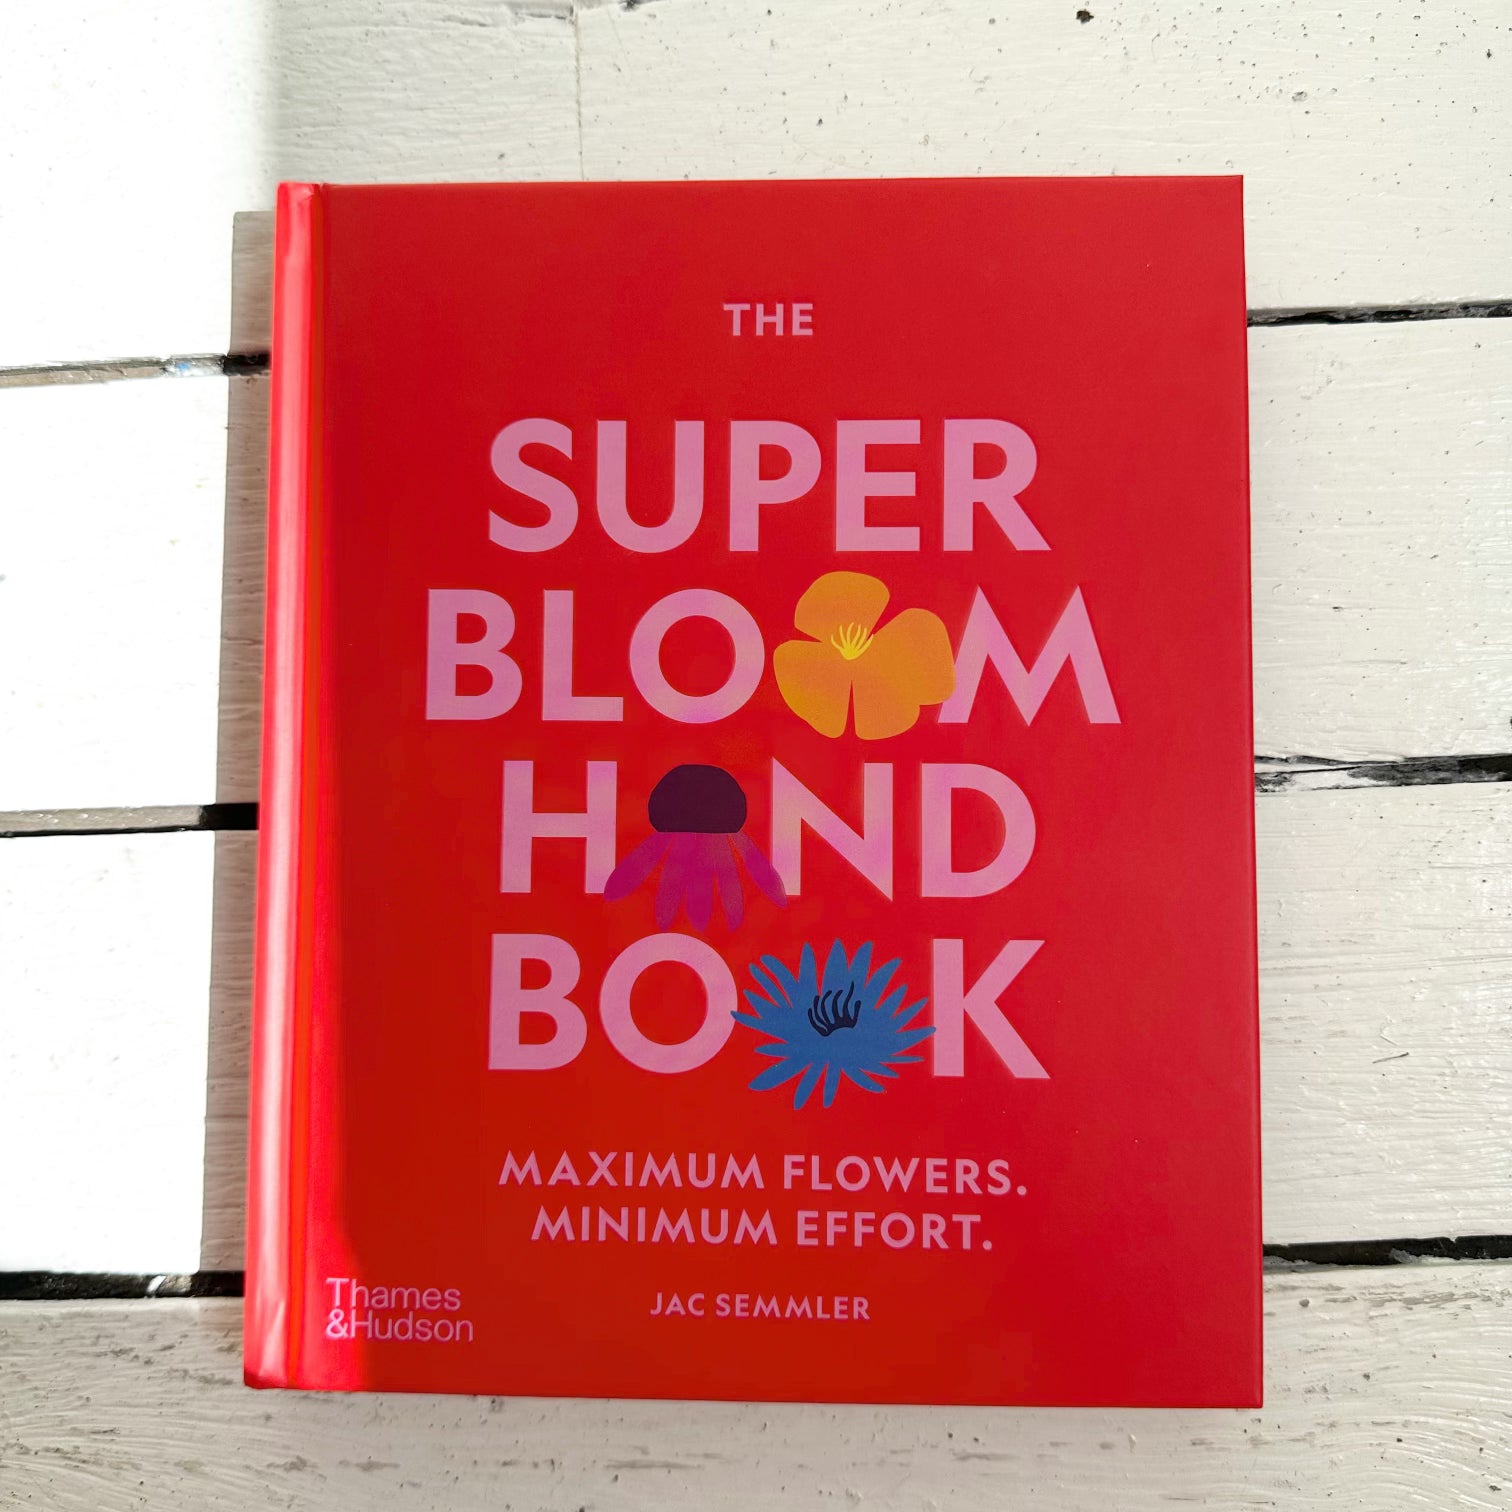 THE SUPER BLOOM HAND BOOK